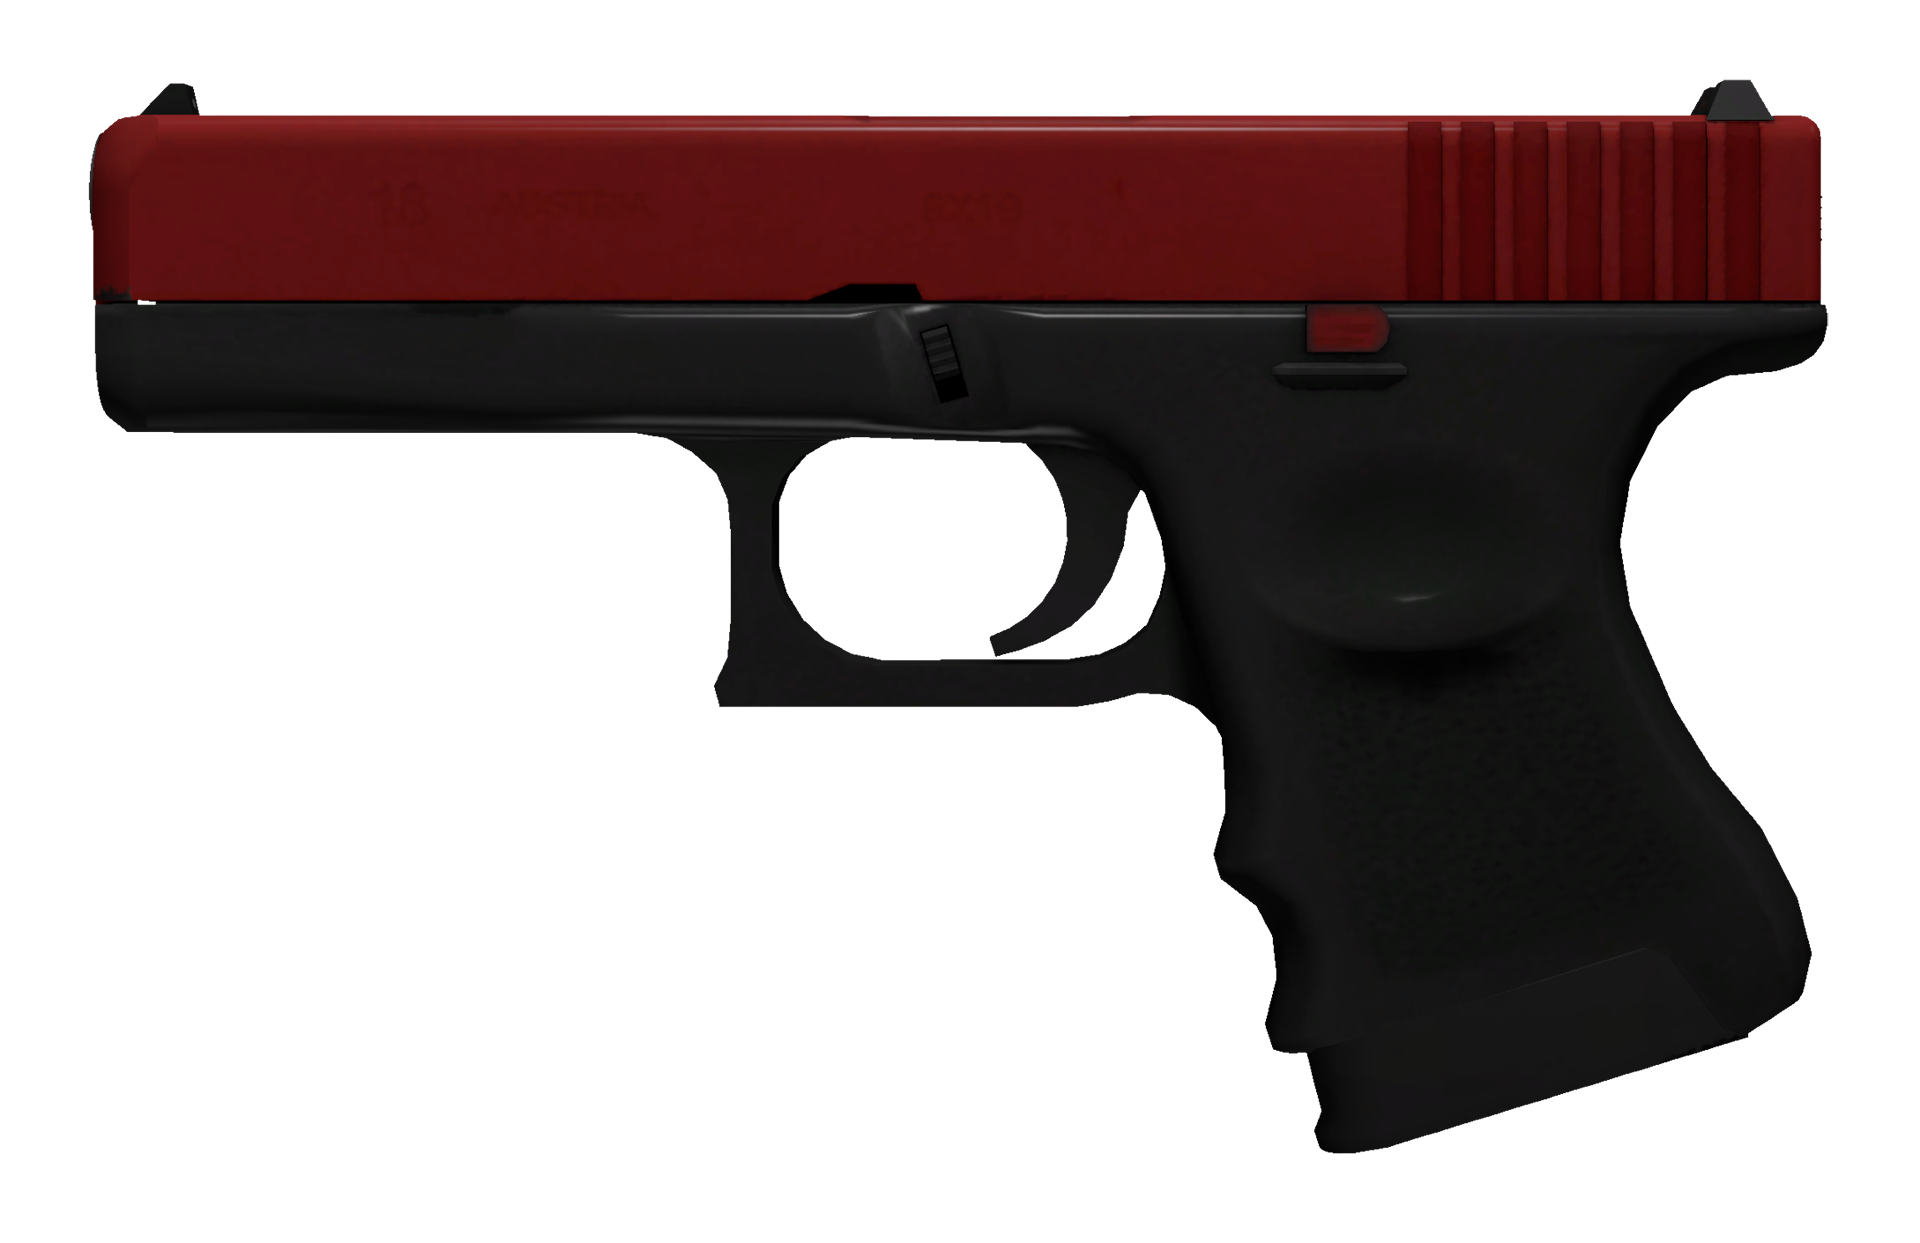 Glock-18 Candy Apple cs go skin download the last version for android